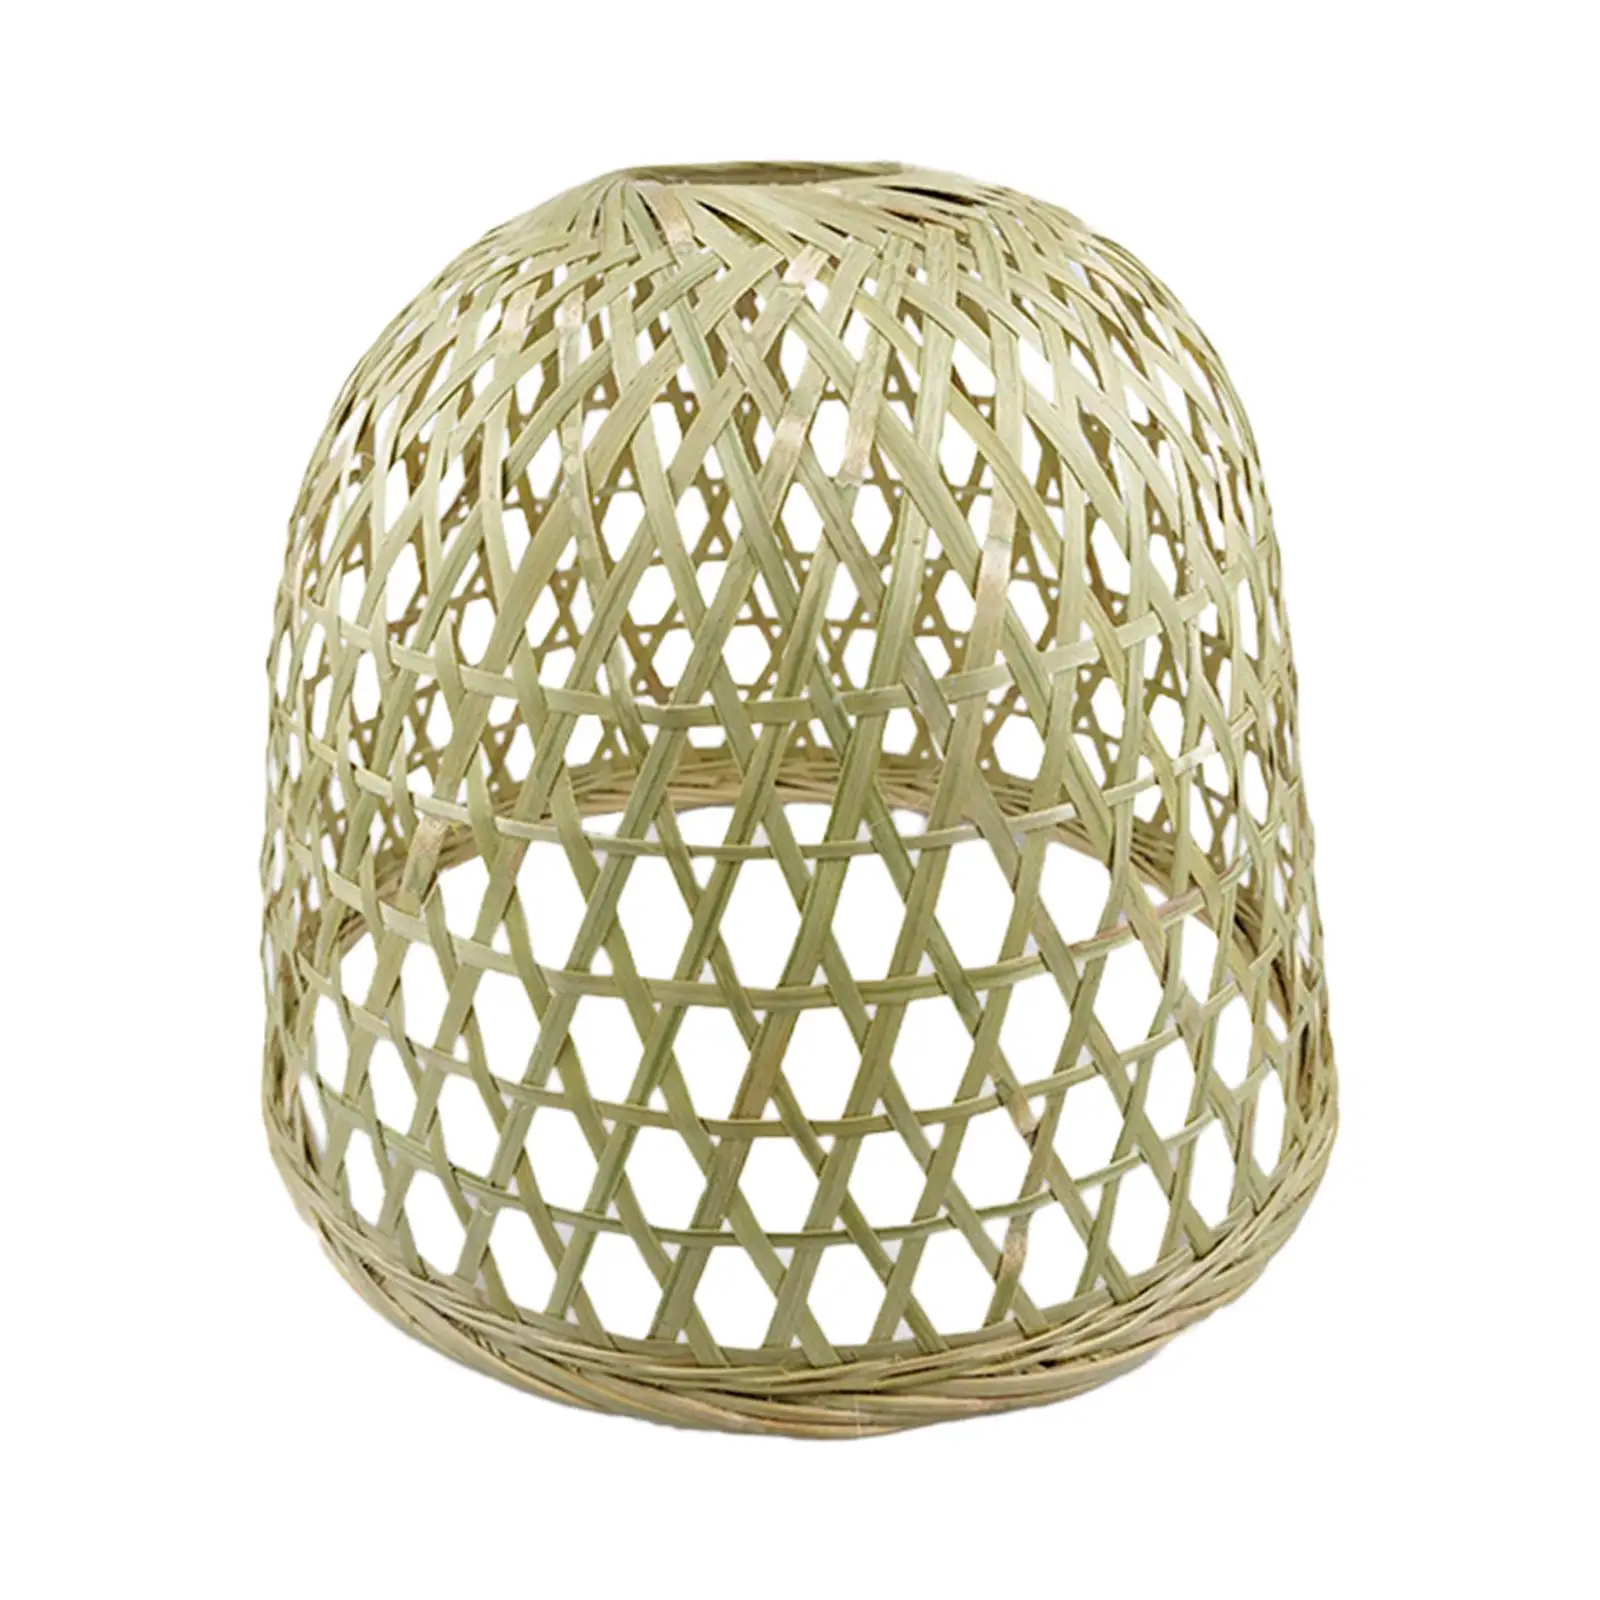 Bamboo Woven Lampshade Rustic Vintage Decoration Durable Minimalist Simple Easy Install Stylish for Kitchen Island Teahouse Cafe